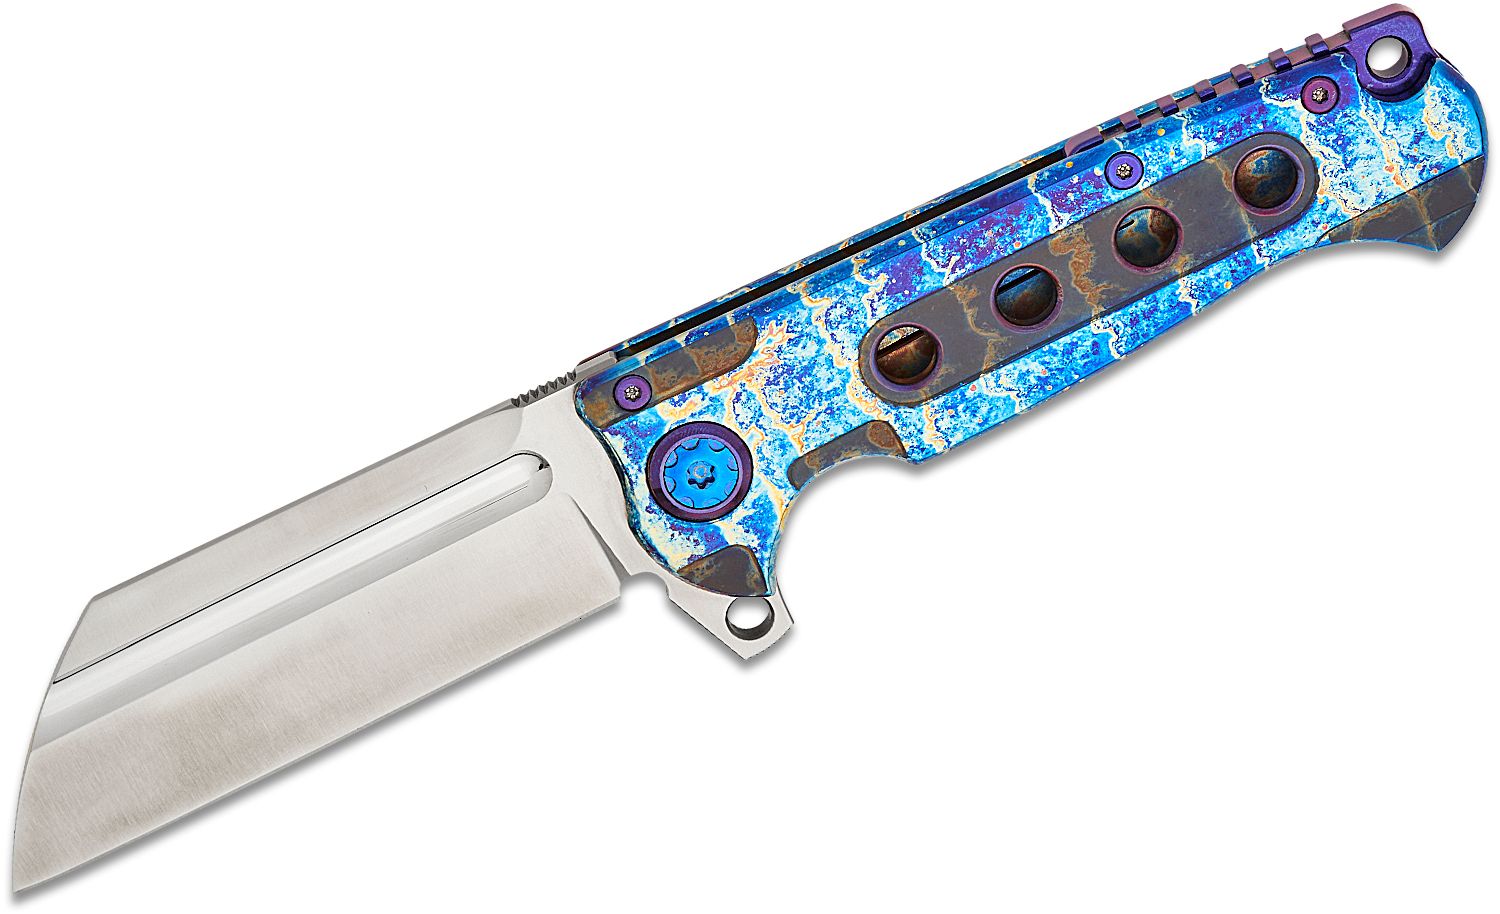 D'Holden for North American Fishing Club Limited Edition Knives